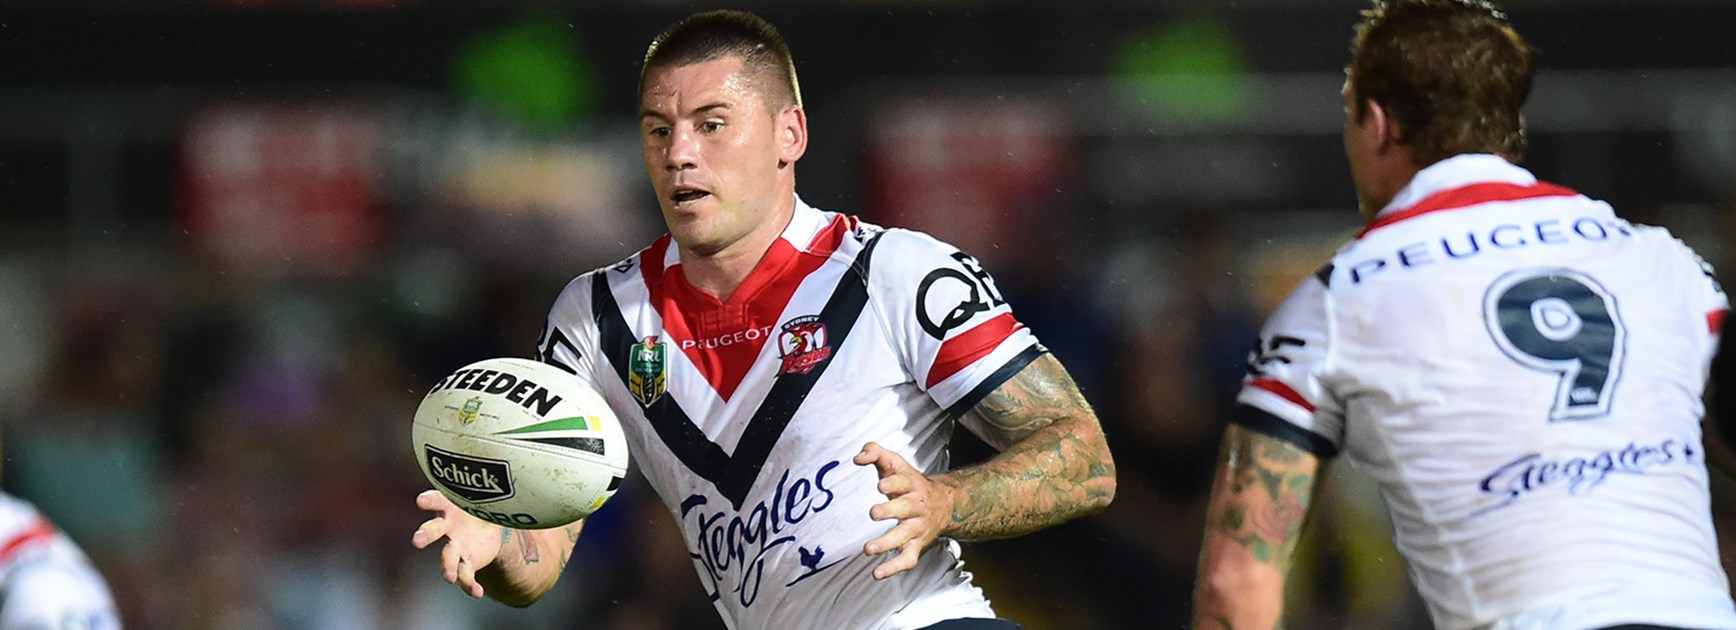 Shaun Kenny-Dowall had a massive solo performance against the Cowboys in Round 3.